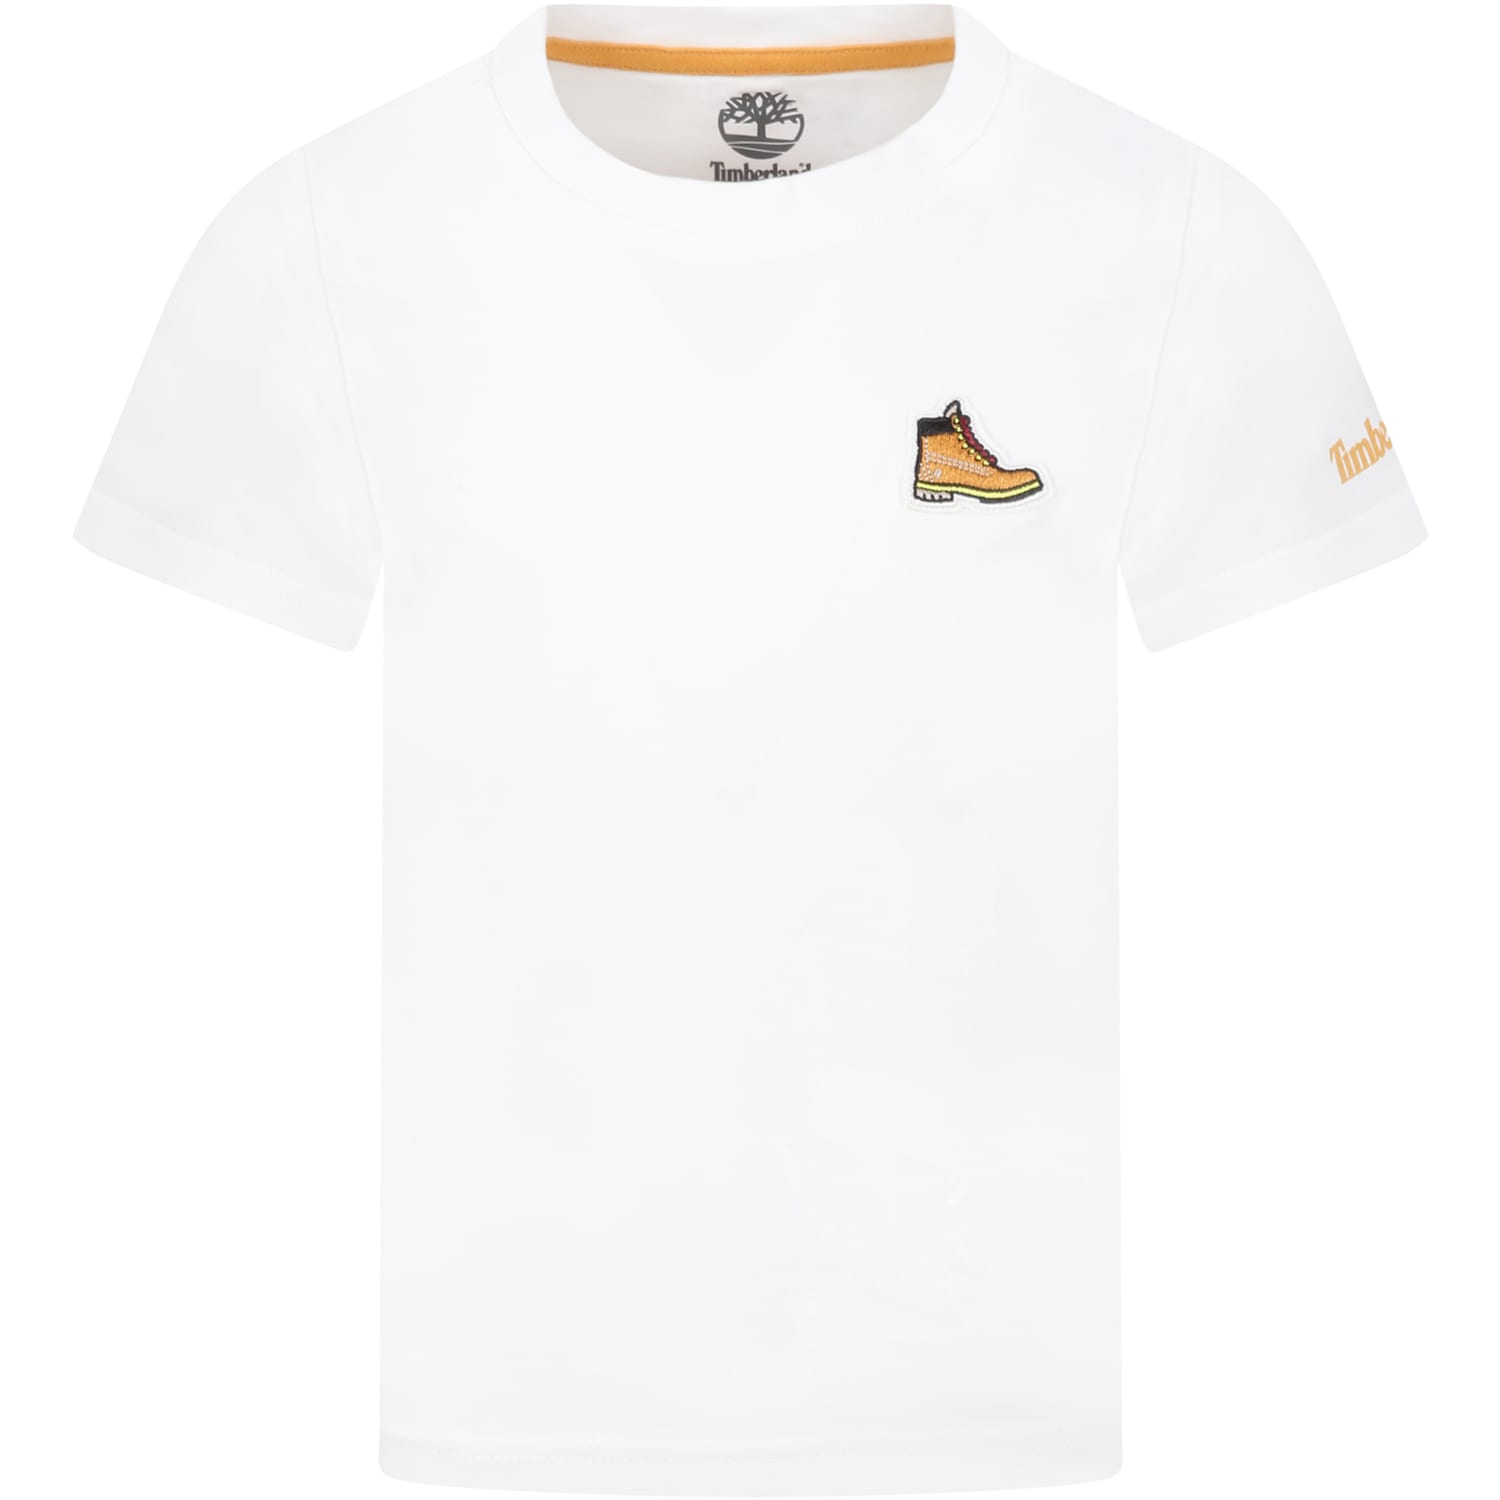 Timberland White T-shirt For Boy With Iconic Shoe